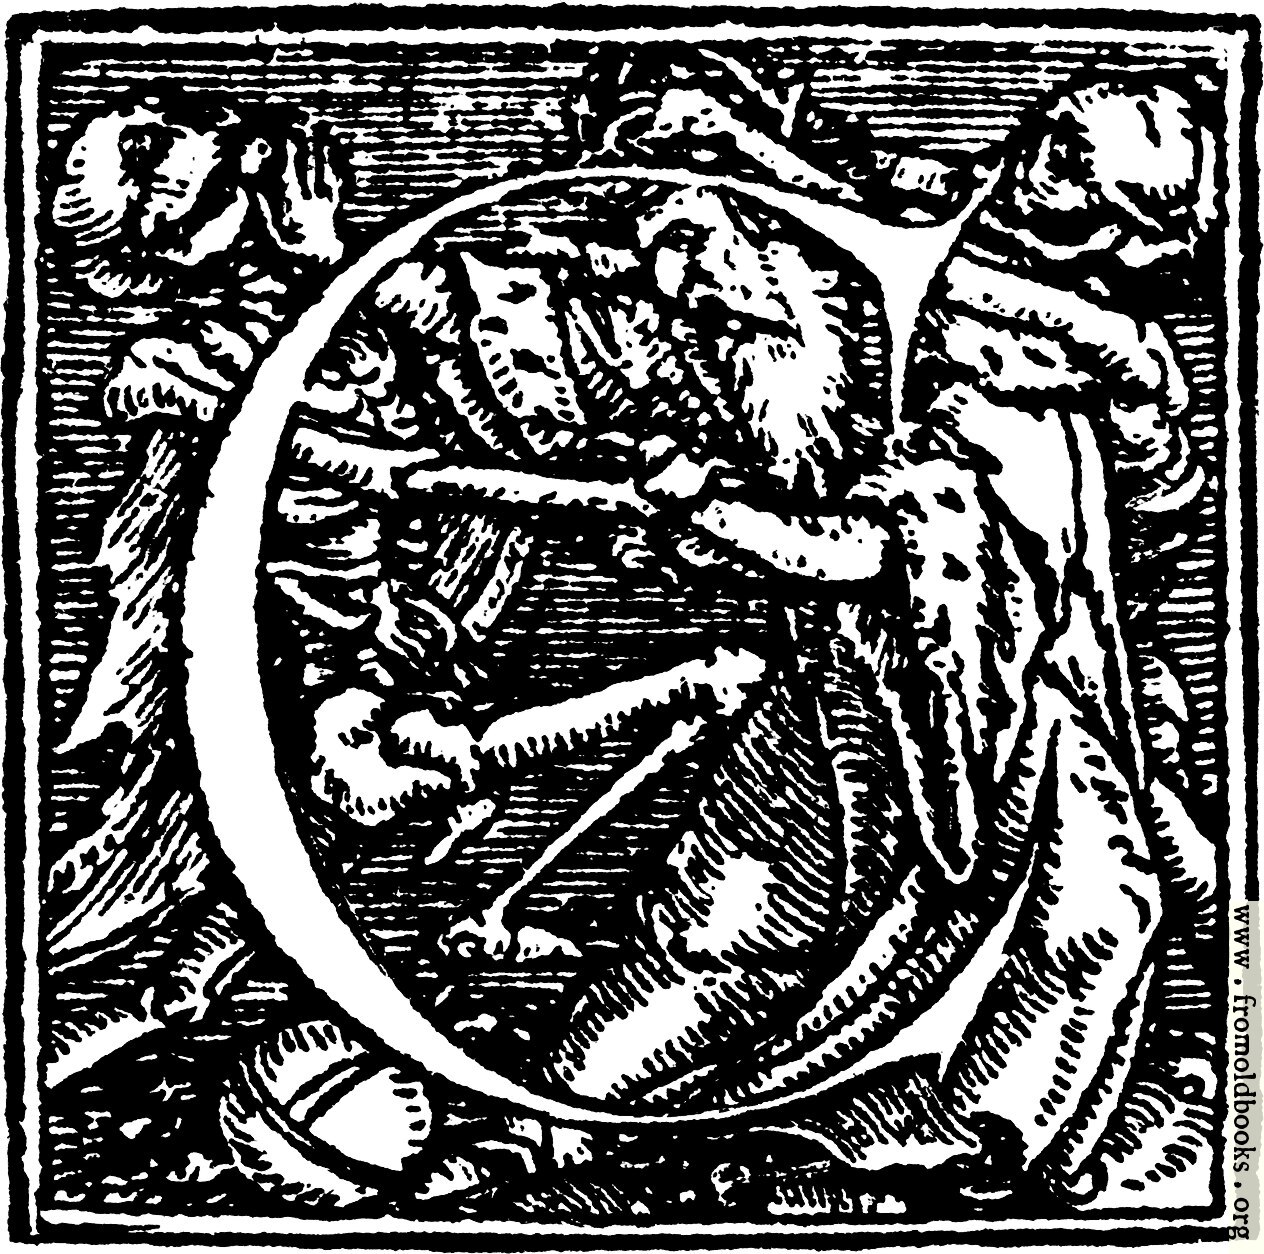 [Picture: 62c.—Initial capital letter “C” from Dance of Death Alphabet]